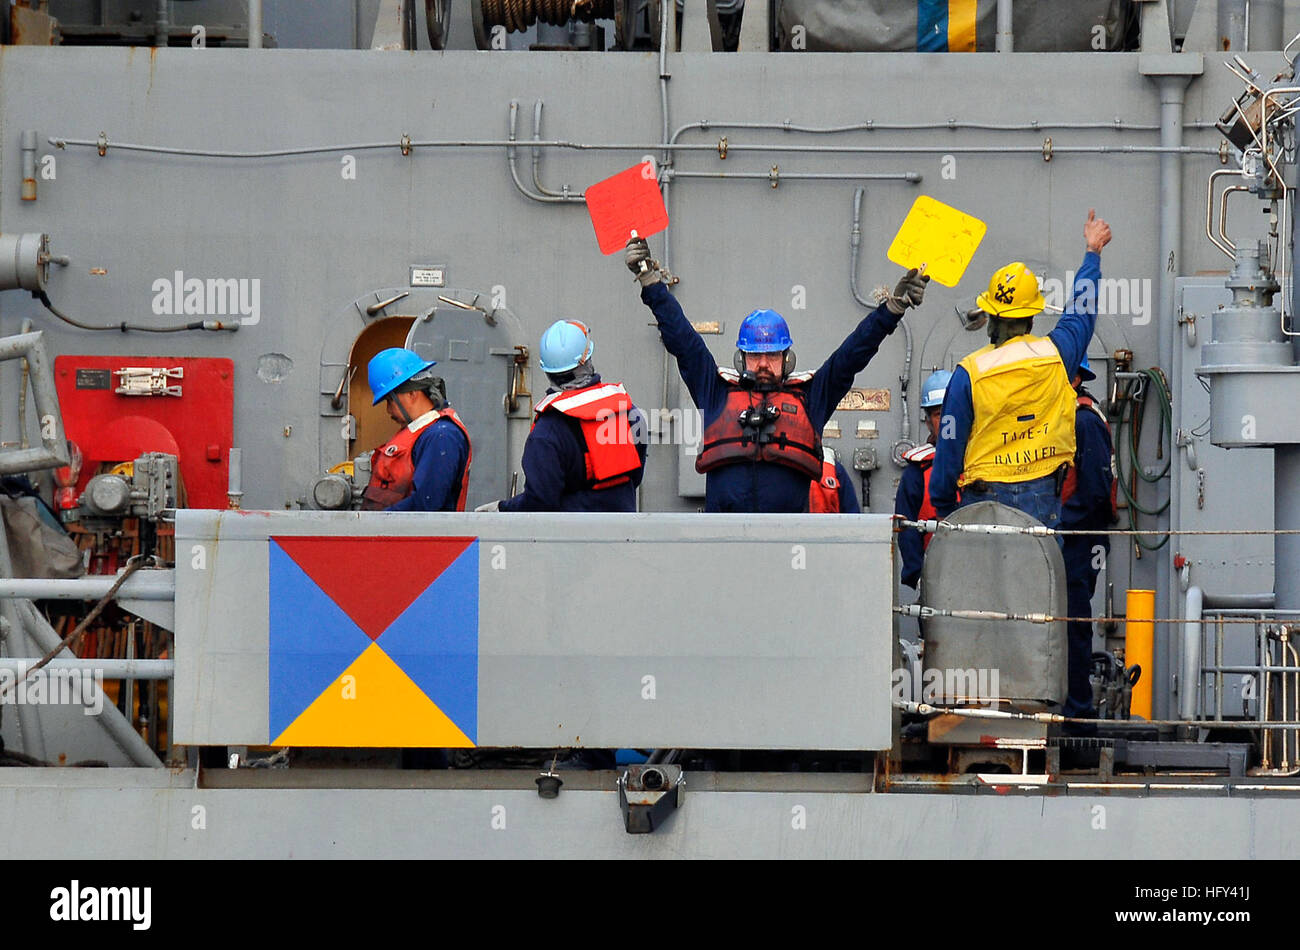 100319-N-4774B-016  PACIFIC OCEAN (March 19, 2010) Merchant Marines aboard the Military Sealift Command fast-combat support ship USNS Rainier (T-AOE 7) signal to Sailors aboard the guided-missile cruiser USS Bunker Hill (CG 52) during a replenishment at sea. Bunker Hill is supporting Southern Seas 2010, a U.S. Southern Command-directed operation that provides U.S. and international forces the opportunity to operate in a multi-national environment. (U.S. Navy photo by Mass Communication Specialist 2nd Class Daniel Barker/Released) US Navy 100319-N-4774B-016 Merchant Mariners aboard the Military Stock Photo